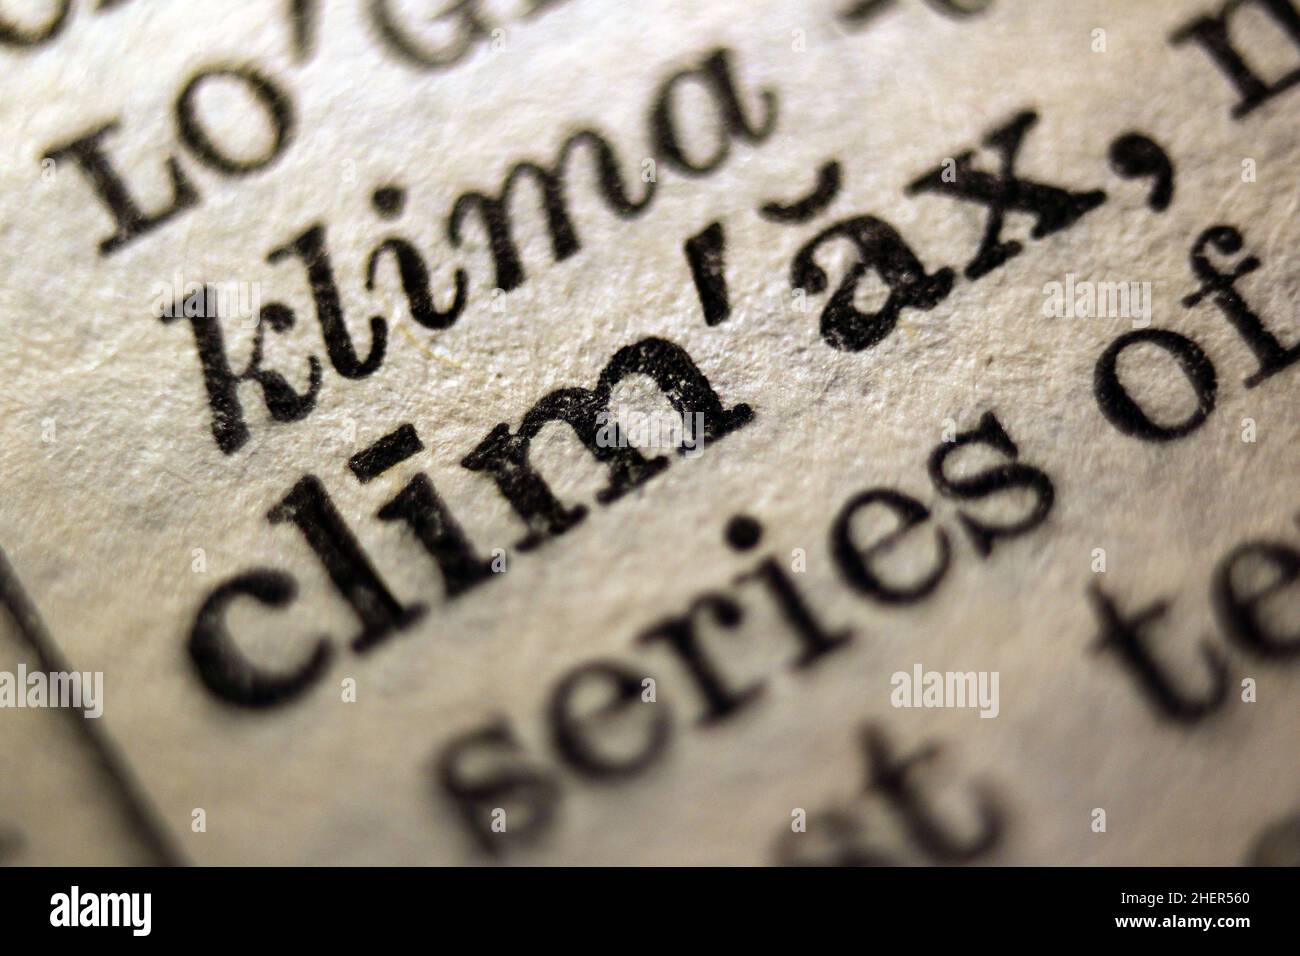 Word 'climax' printed on dictionary page, macro close-up Stock Photo